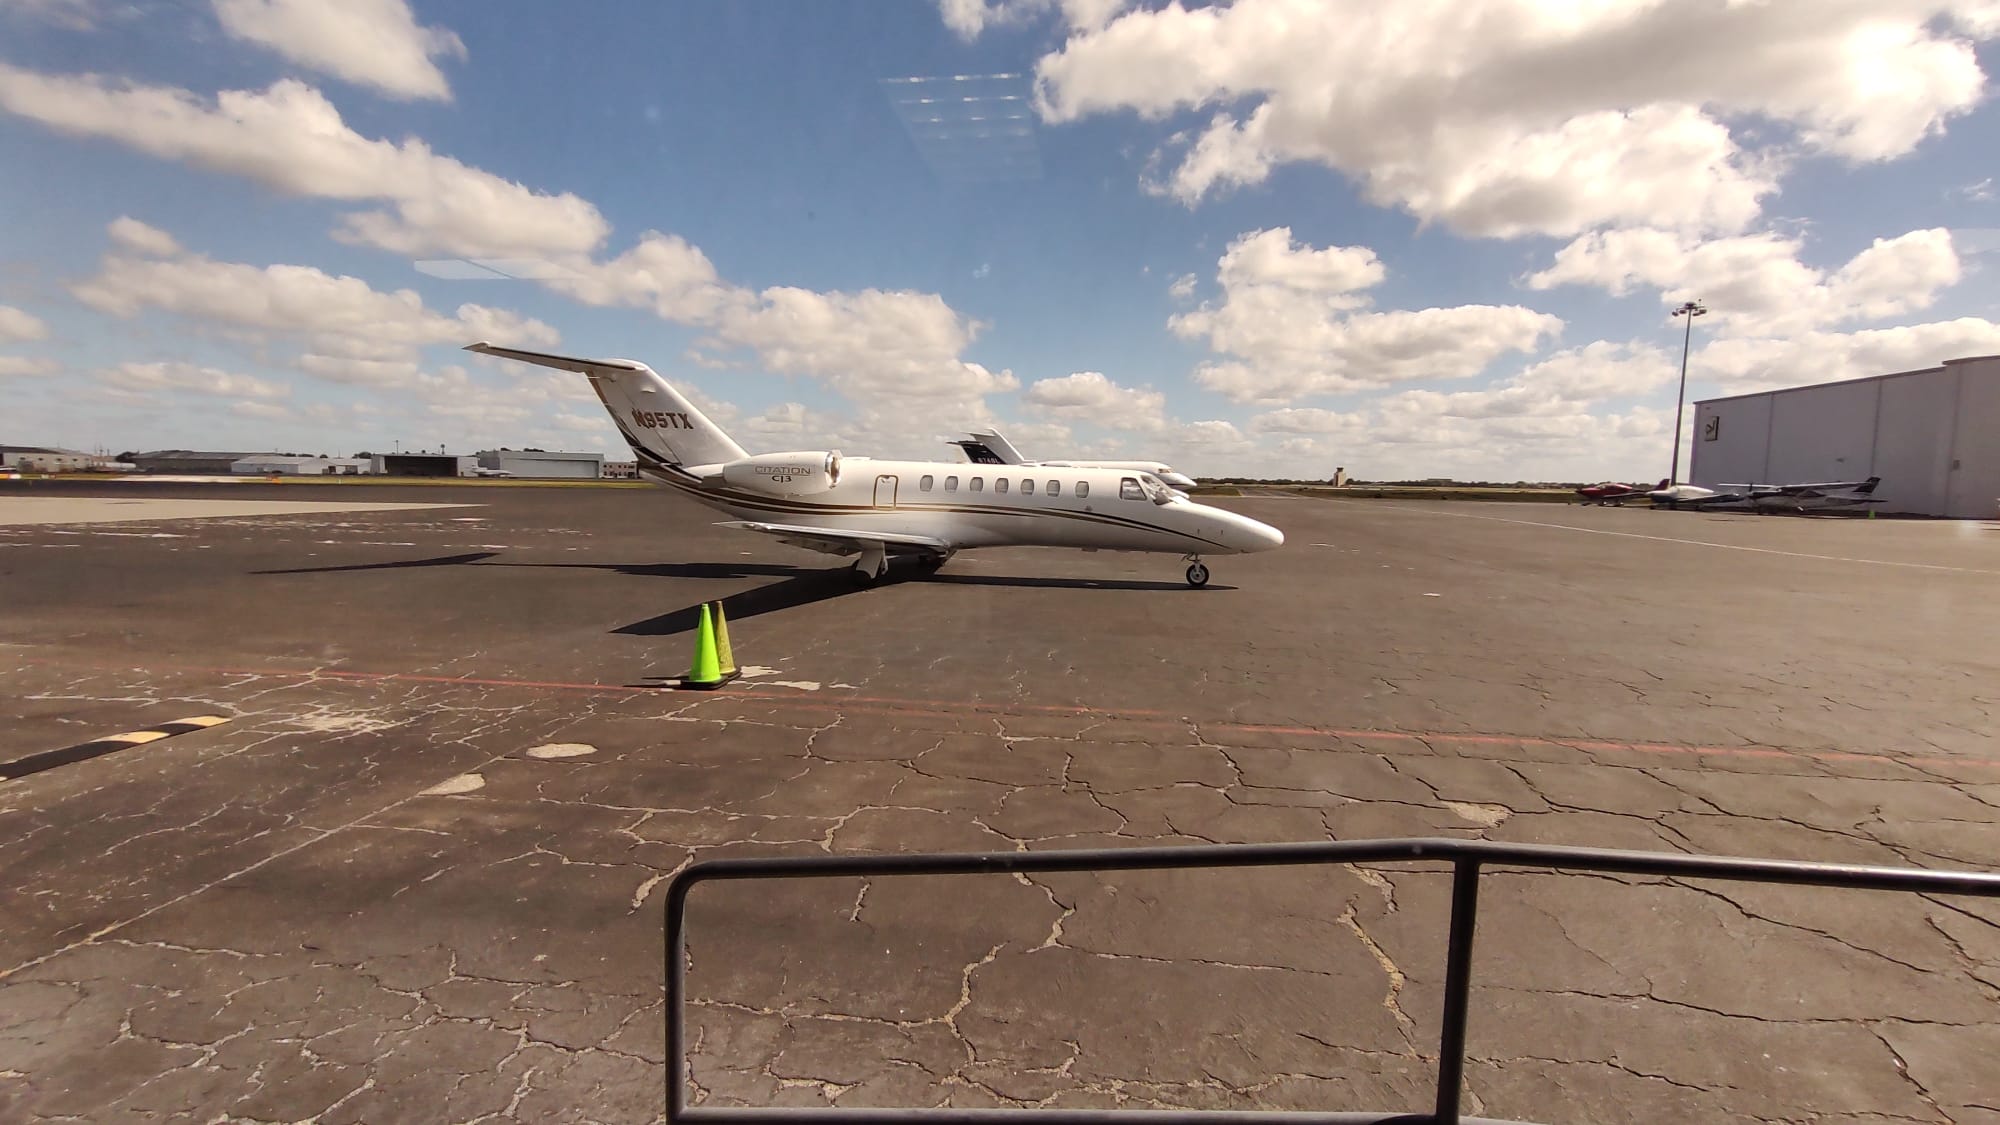 Our Visit to Orlando Executive Airport To See Private Jet Charter Companies